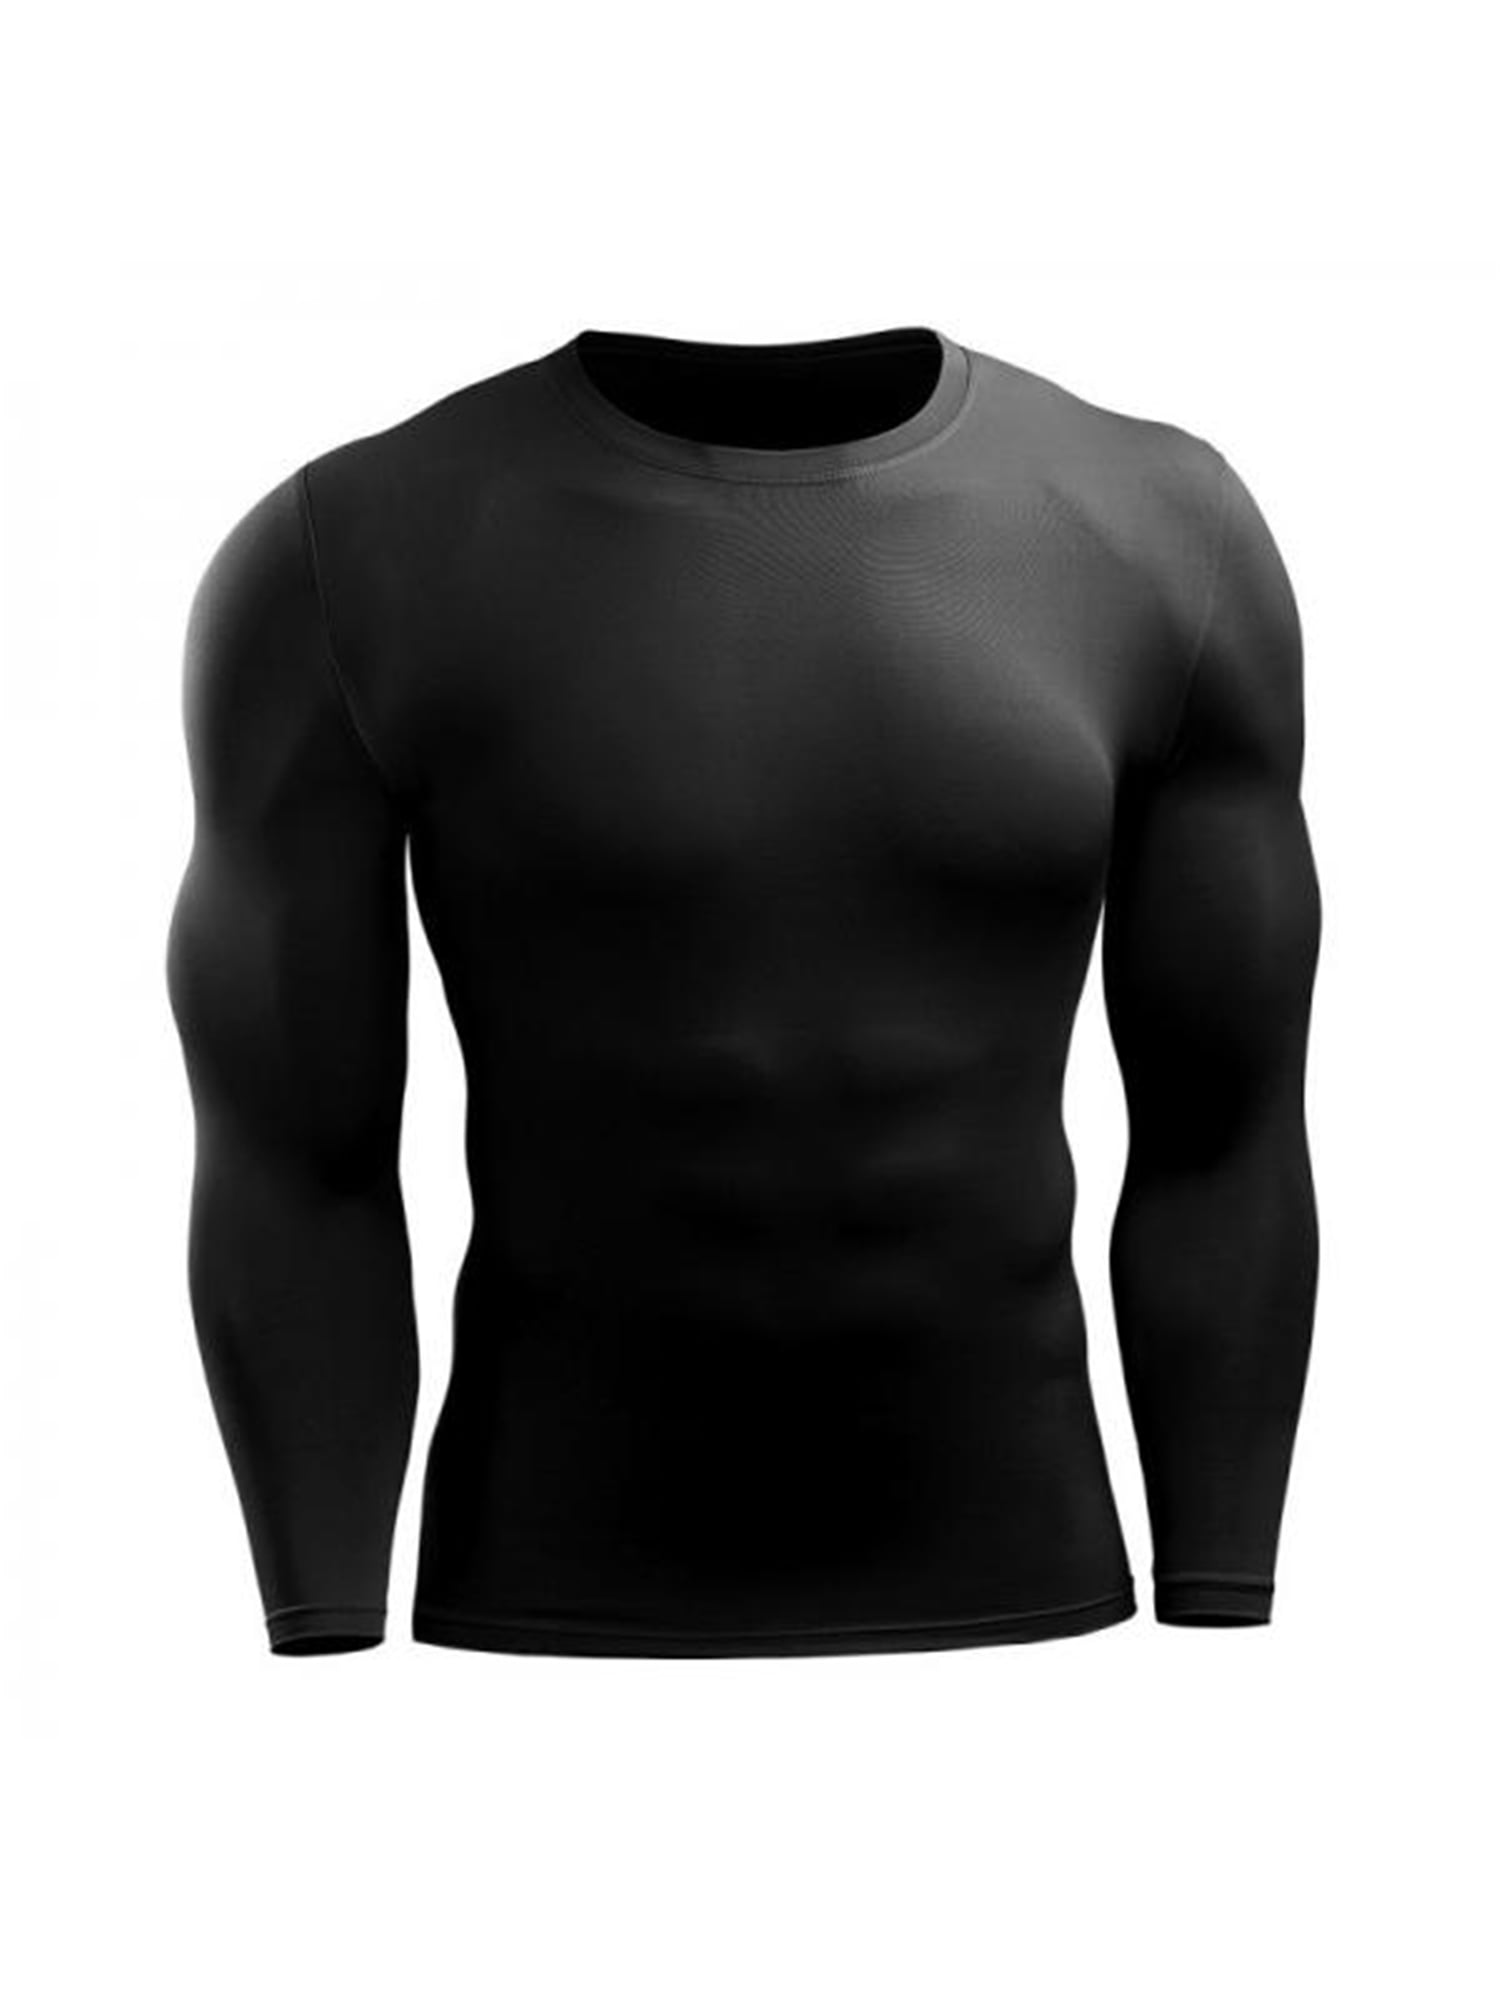 Details about   Men Long Sleeve T-shirt Compression Sport Base Layer Gym Breathable Muscle Top 